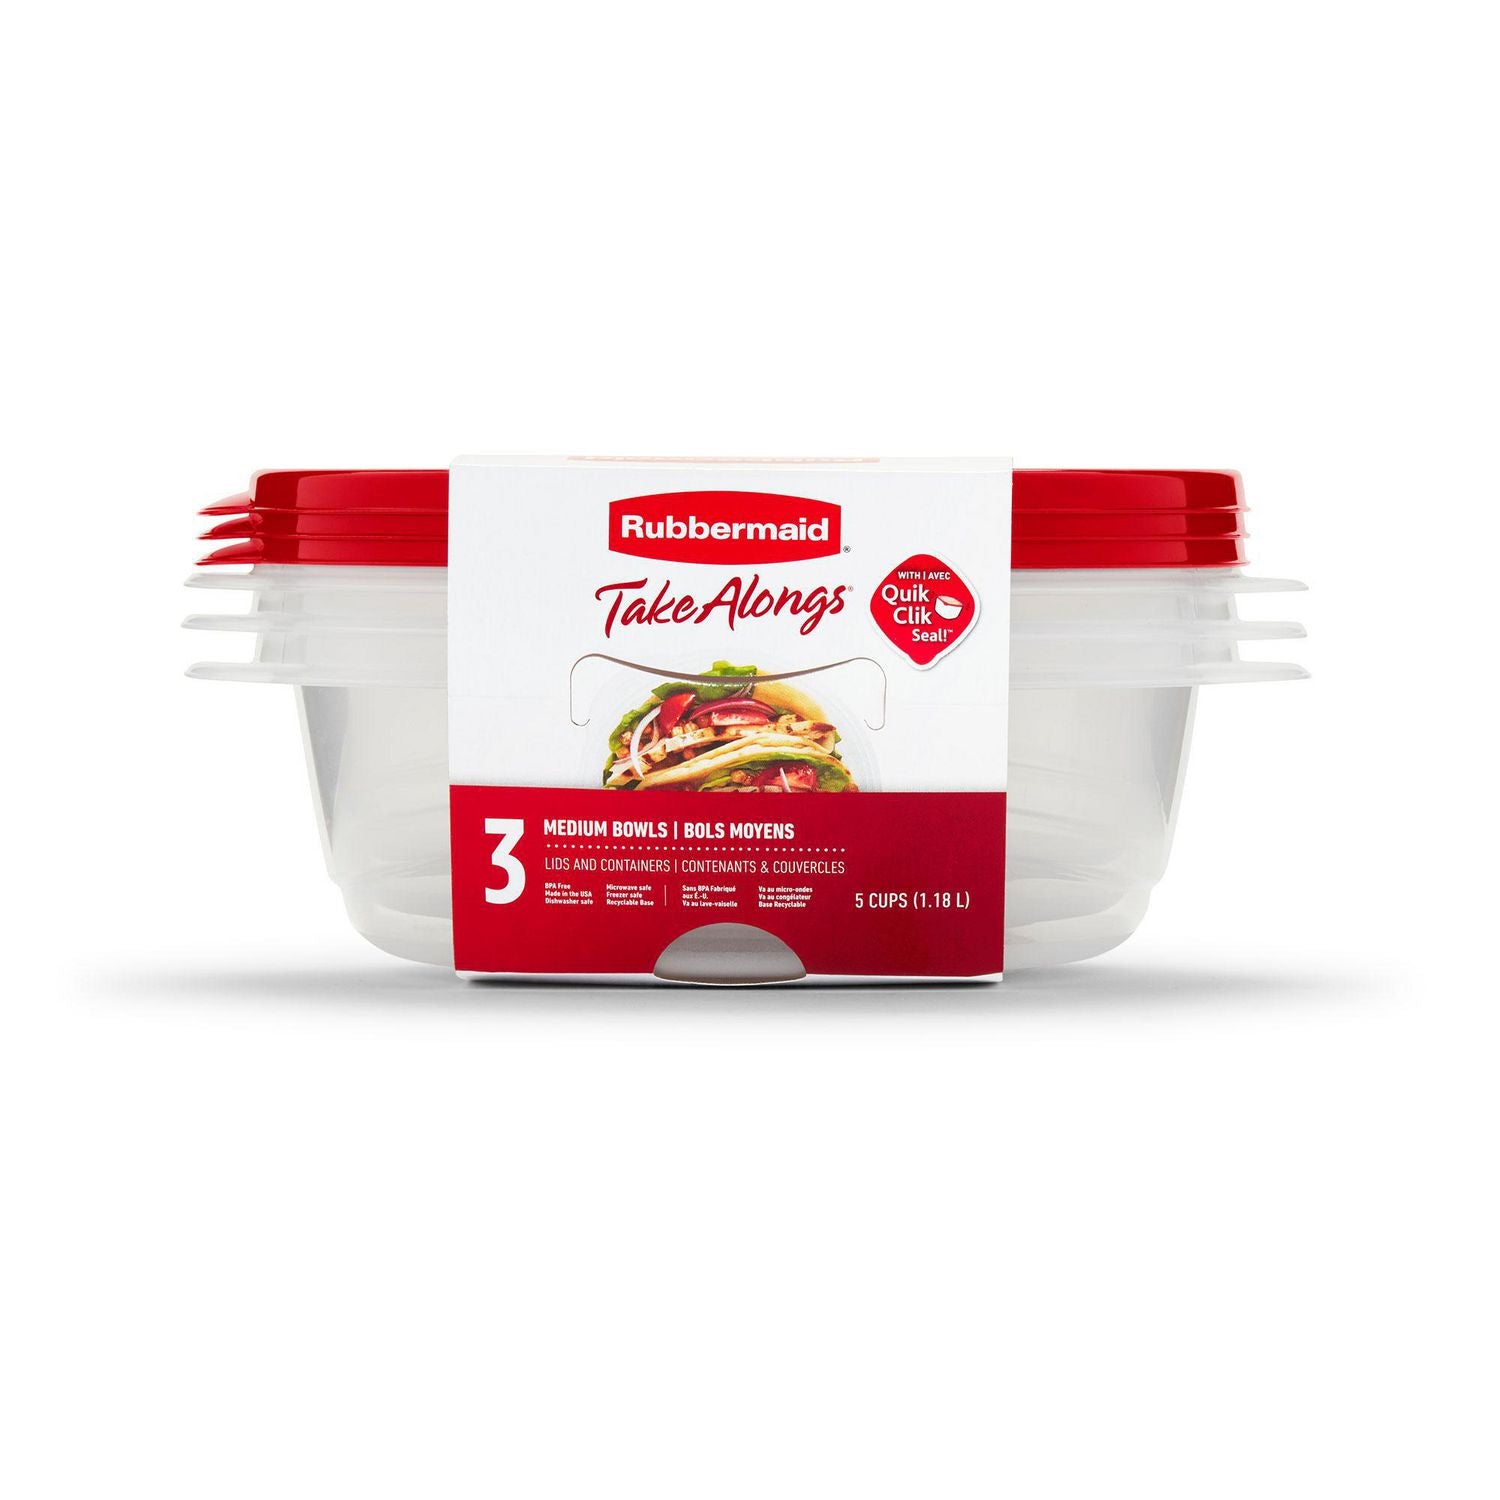 Rubbermaid Takealongs Bowl Food Storage Container, 1.18 (3 Pack)